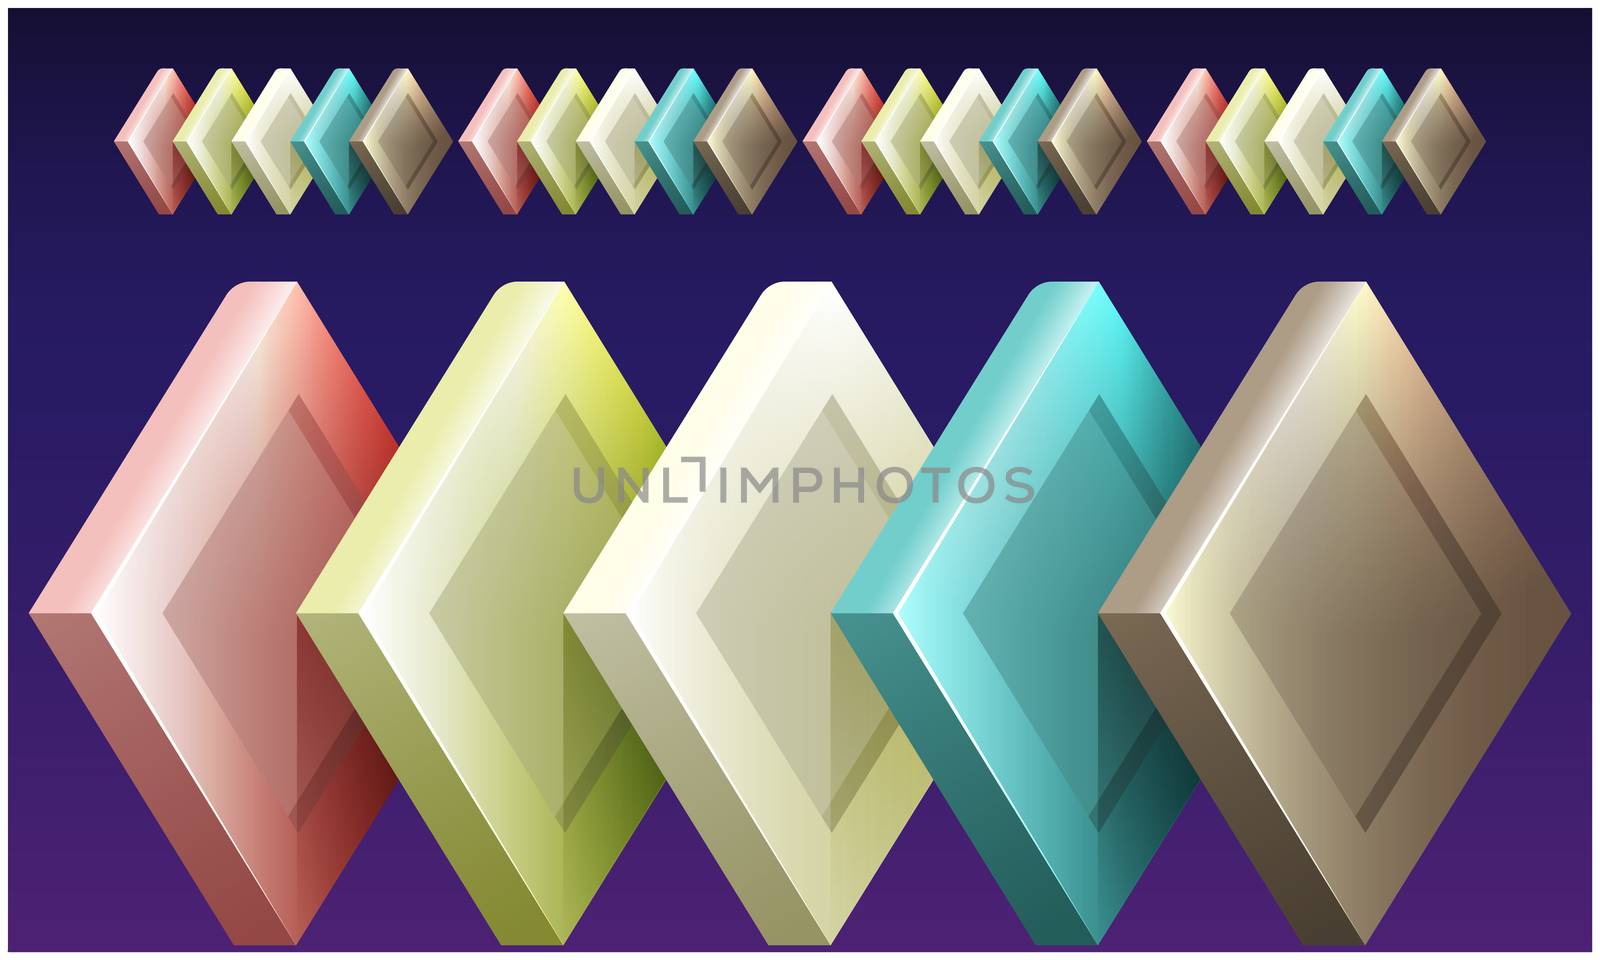 digital textile design of diamond boxes on abstract backgrounds